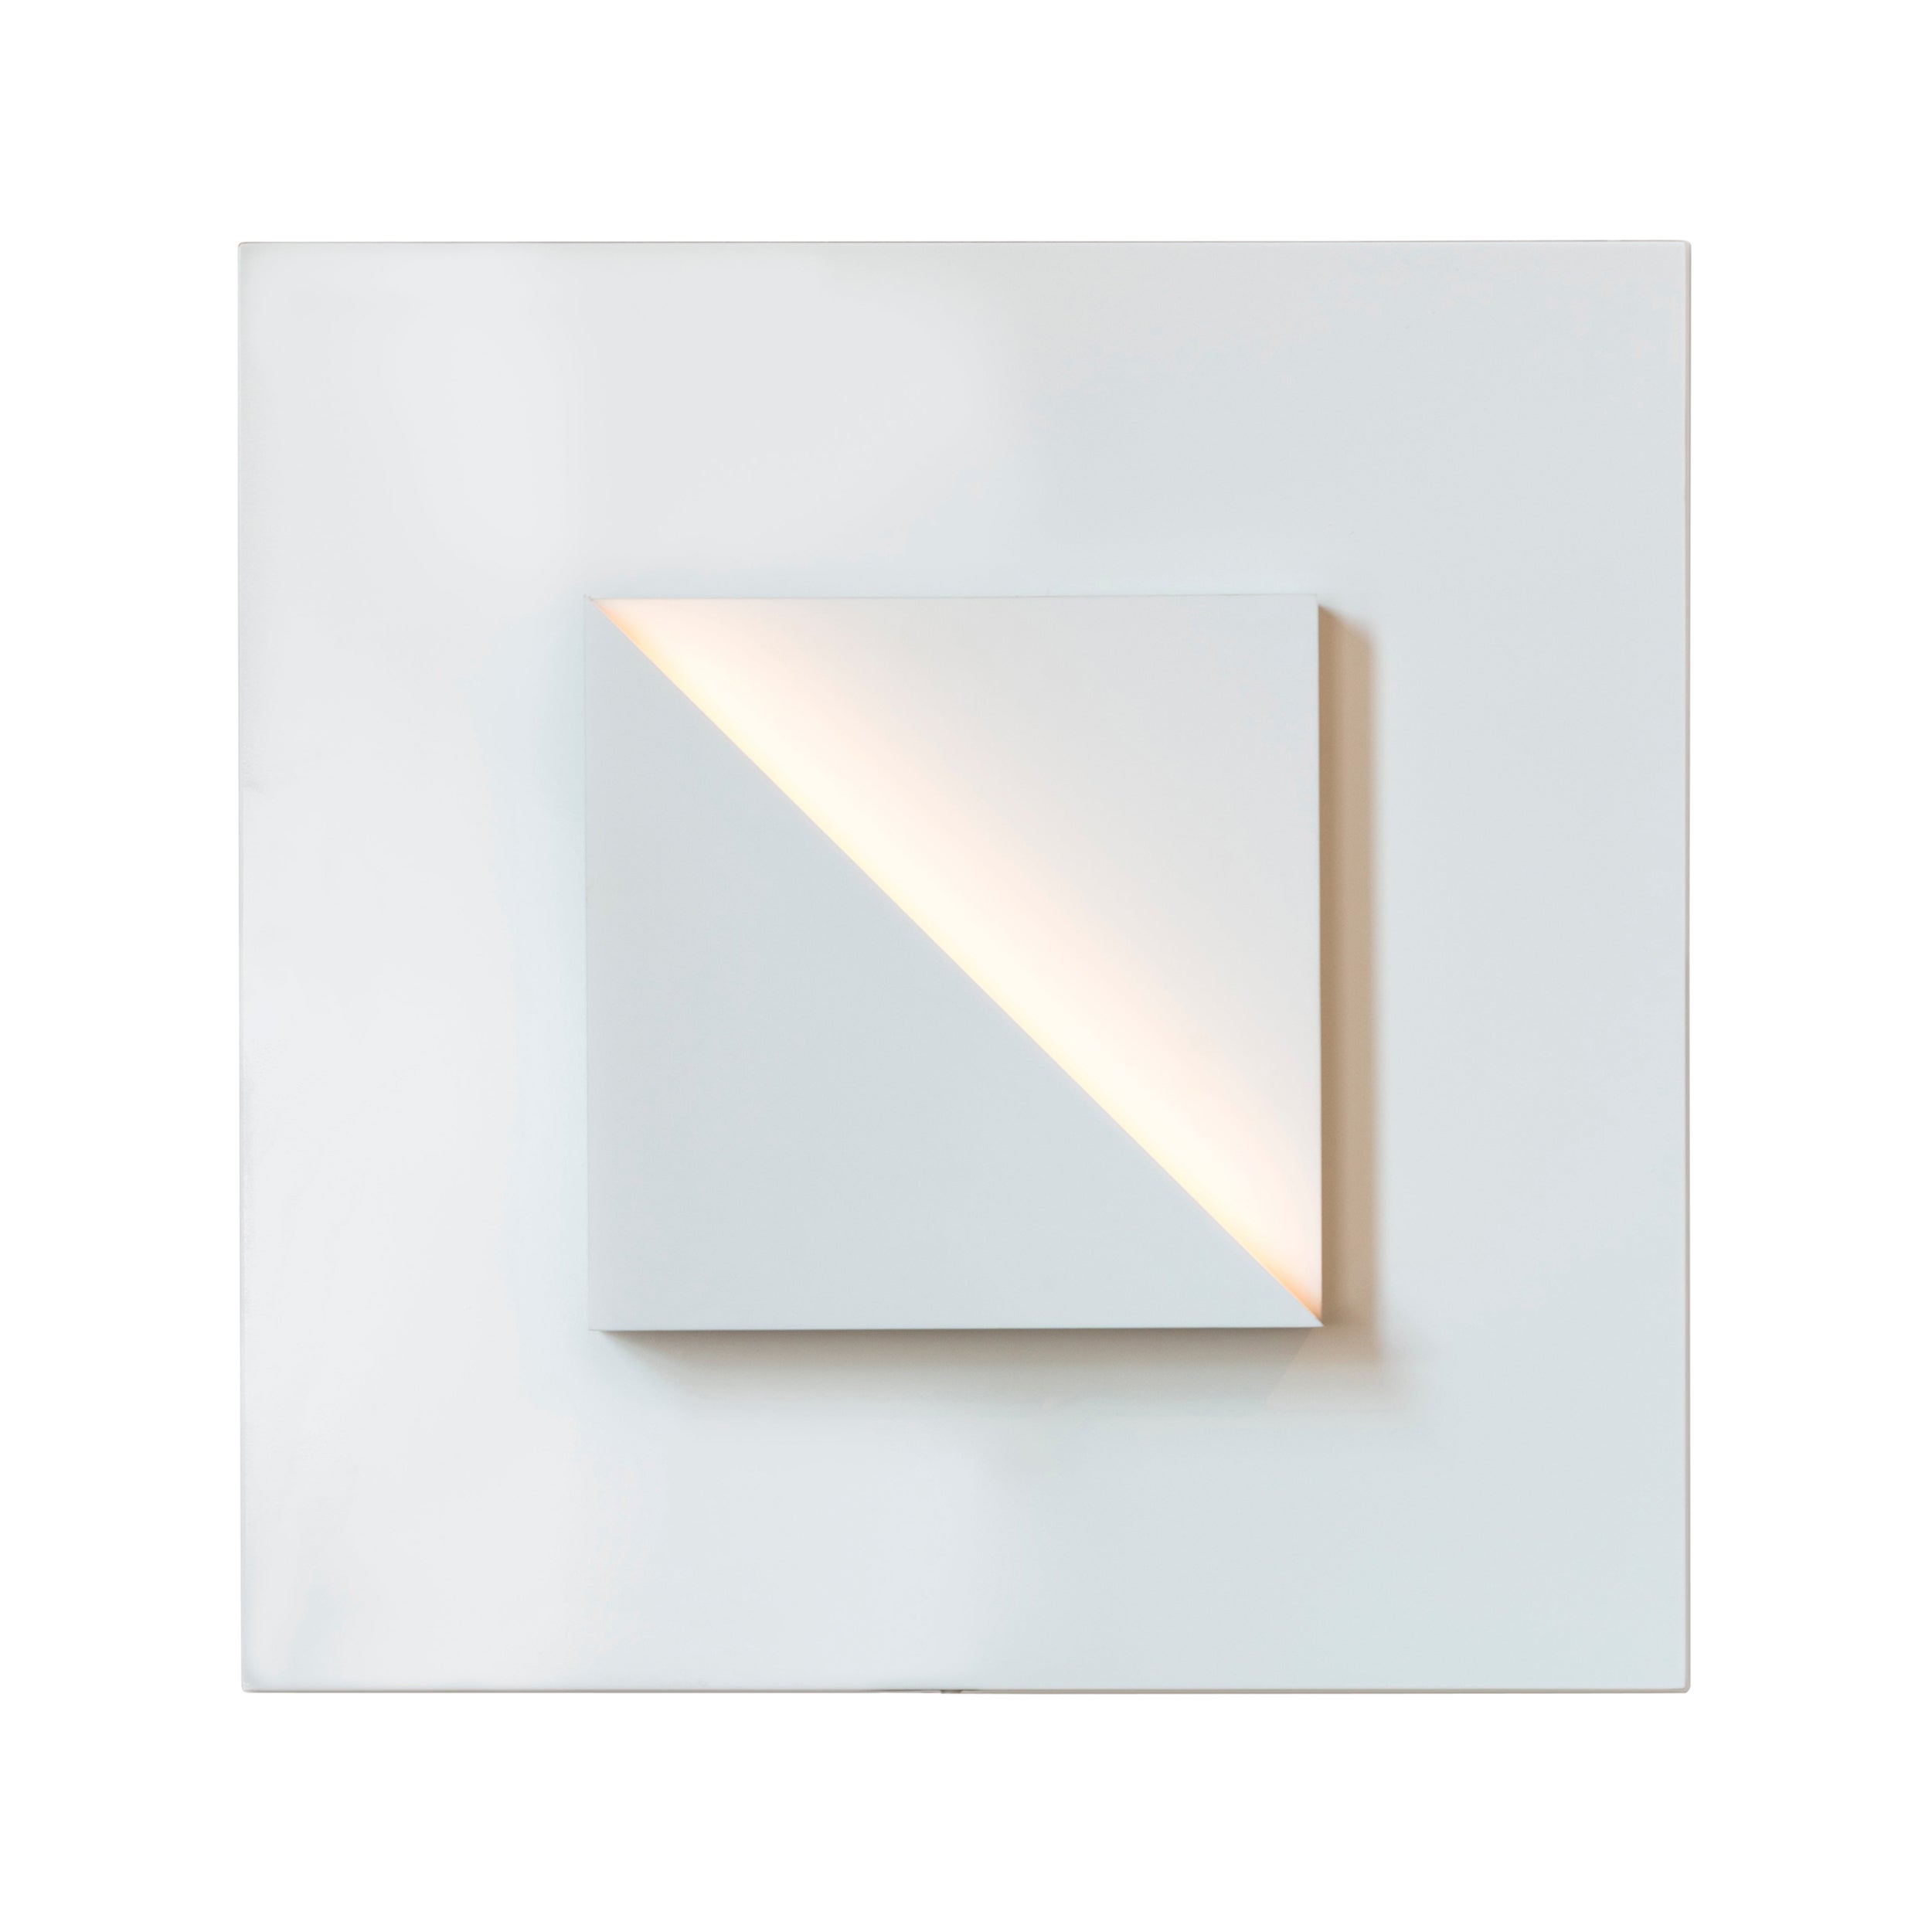 Cycladic Framed Square Sconce